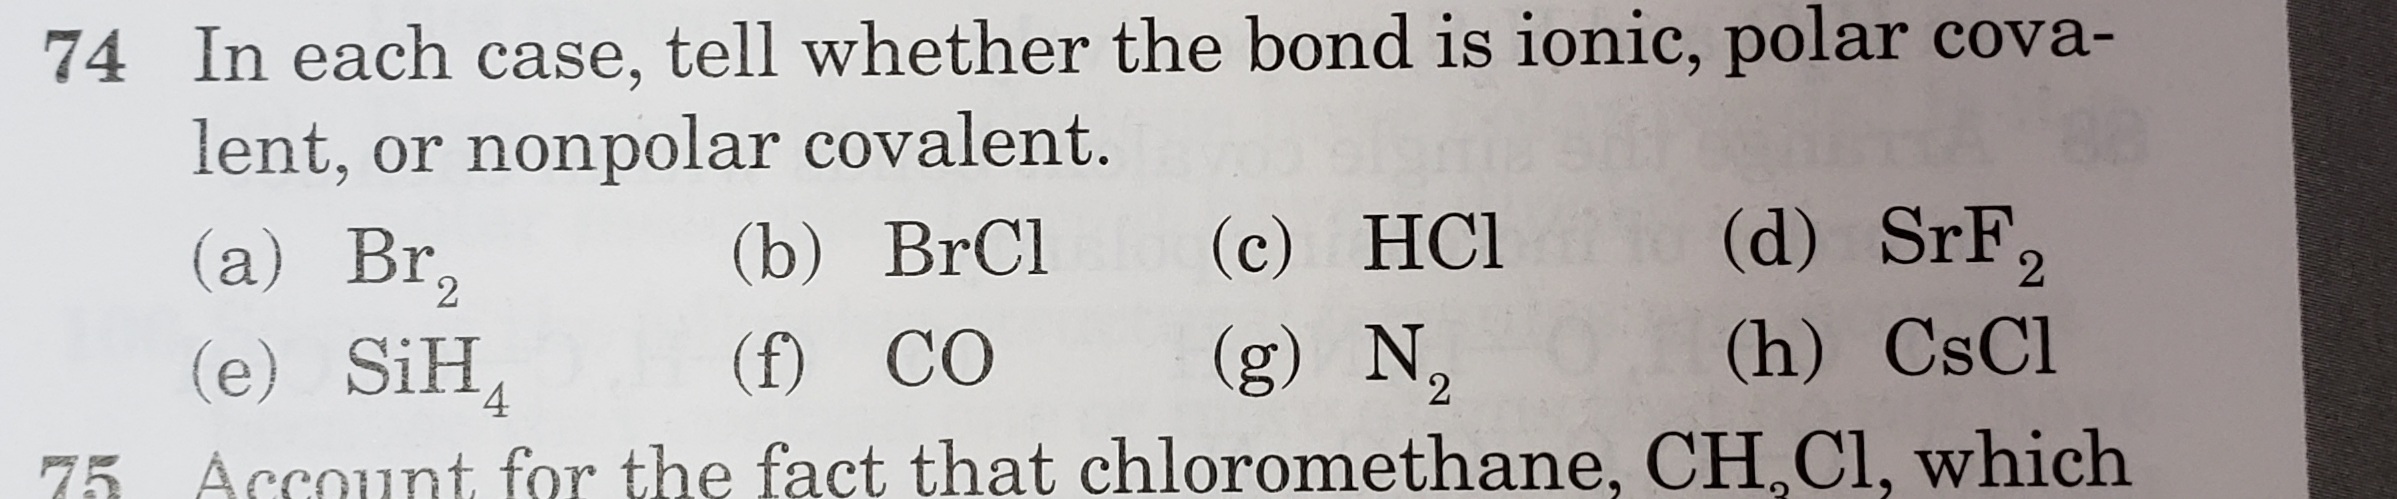 In each case, tell whether the bond is ionic, polar cova-
lent, or nonpolar covalent.
(a) Br,
(e) SiH,
(d) SrF,
(c) HCl
(g) N,
(b) BrCl
2
(f) CO
(h) CsCl
4.
